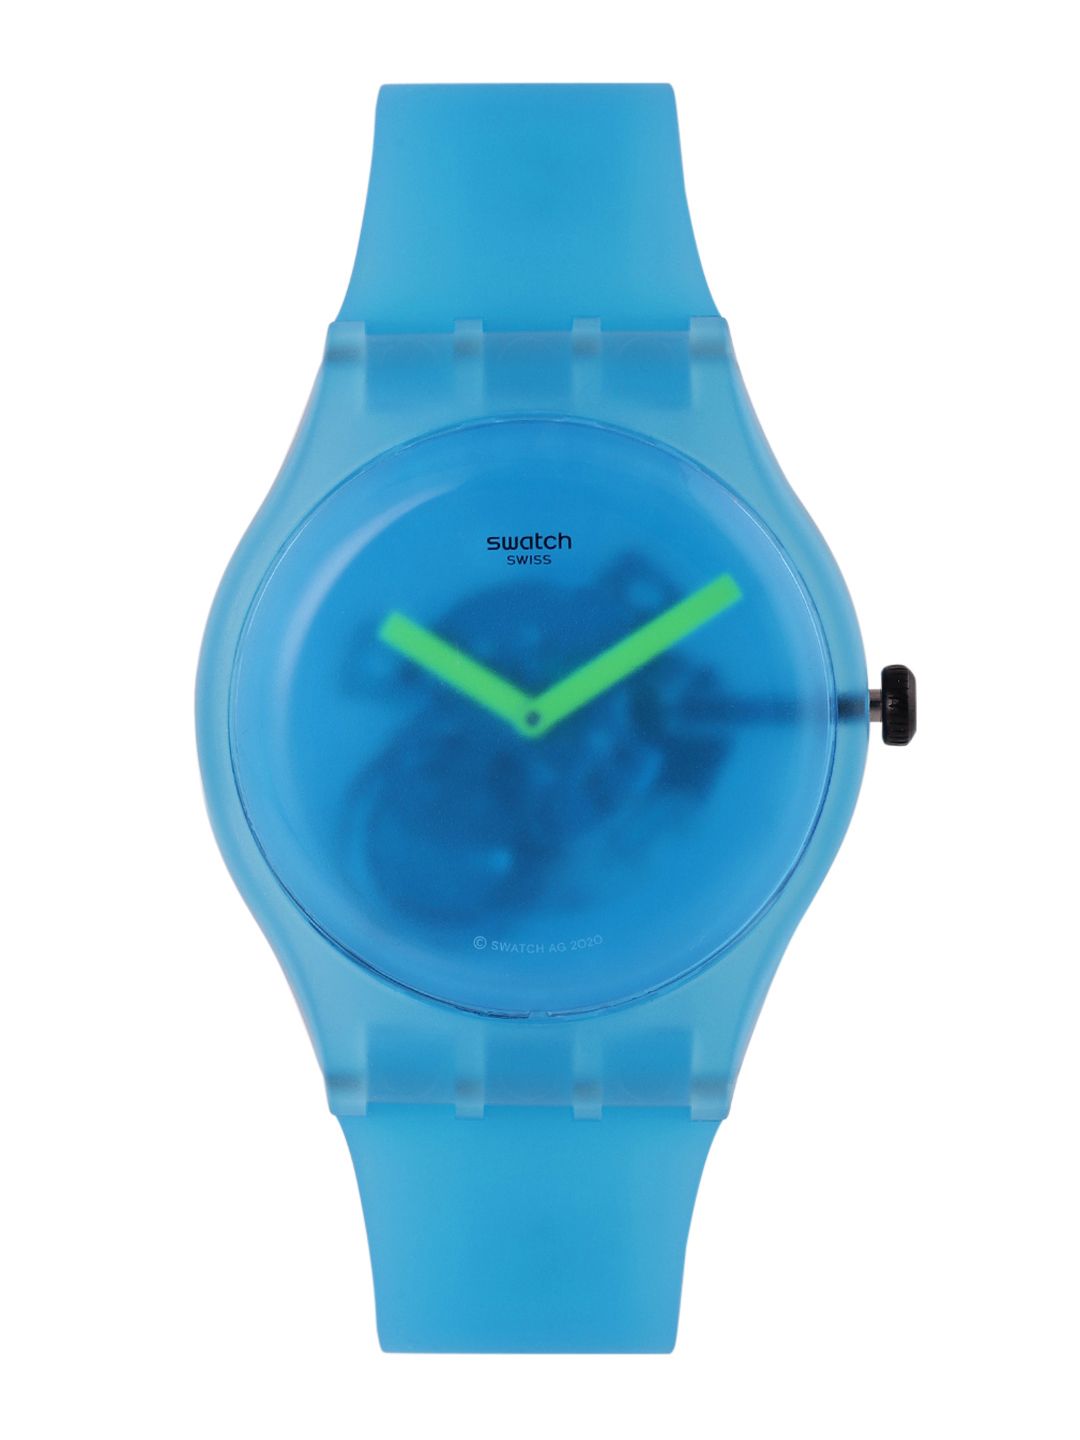 Swatch Unisex Blue Swiss Made Water Resistant Analogue Watch SUOS112 Price in India